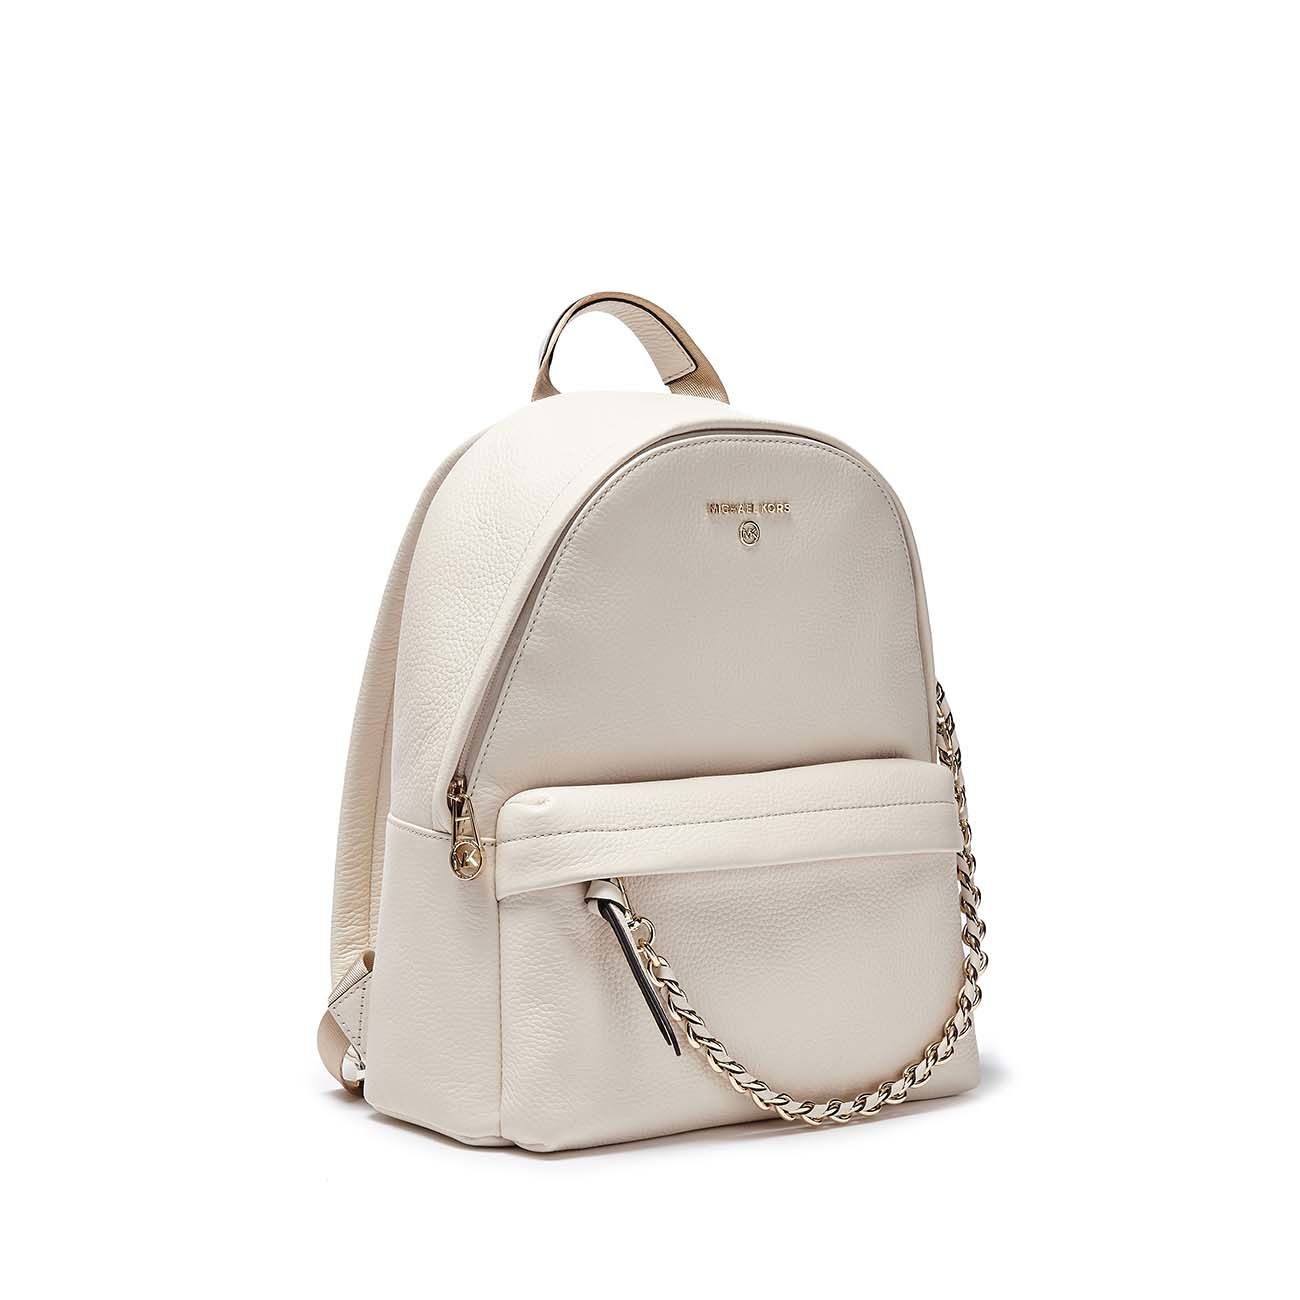 MICHAEL KORS SLATER BACKPACK IN HAMMERED LEATHER WITH GOLD CHAIN Woman  Cream | Mascheroni Store